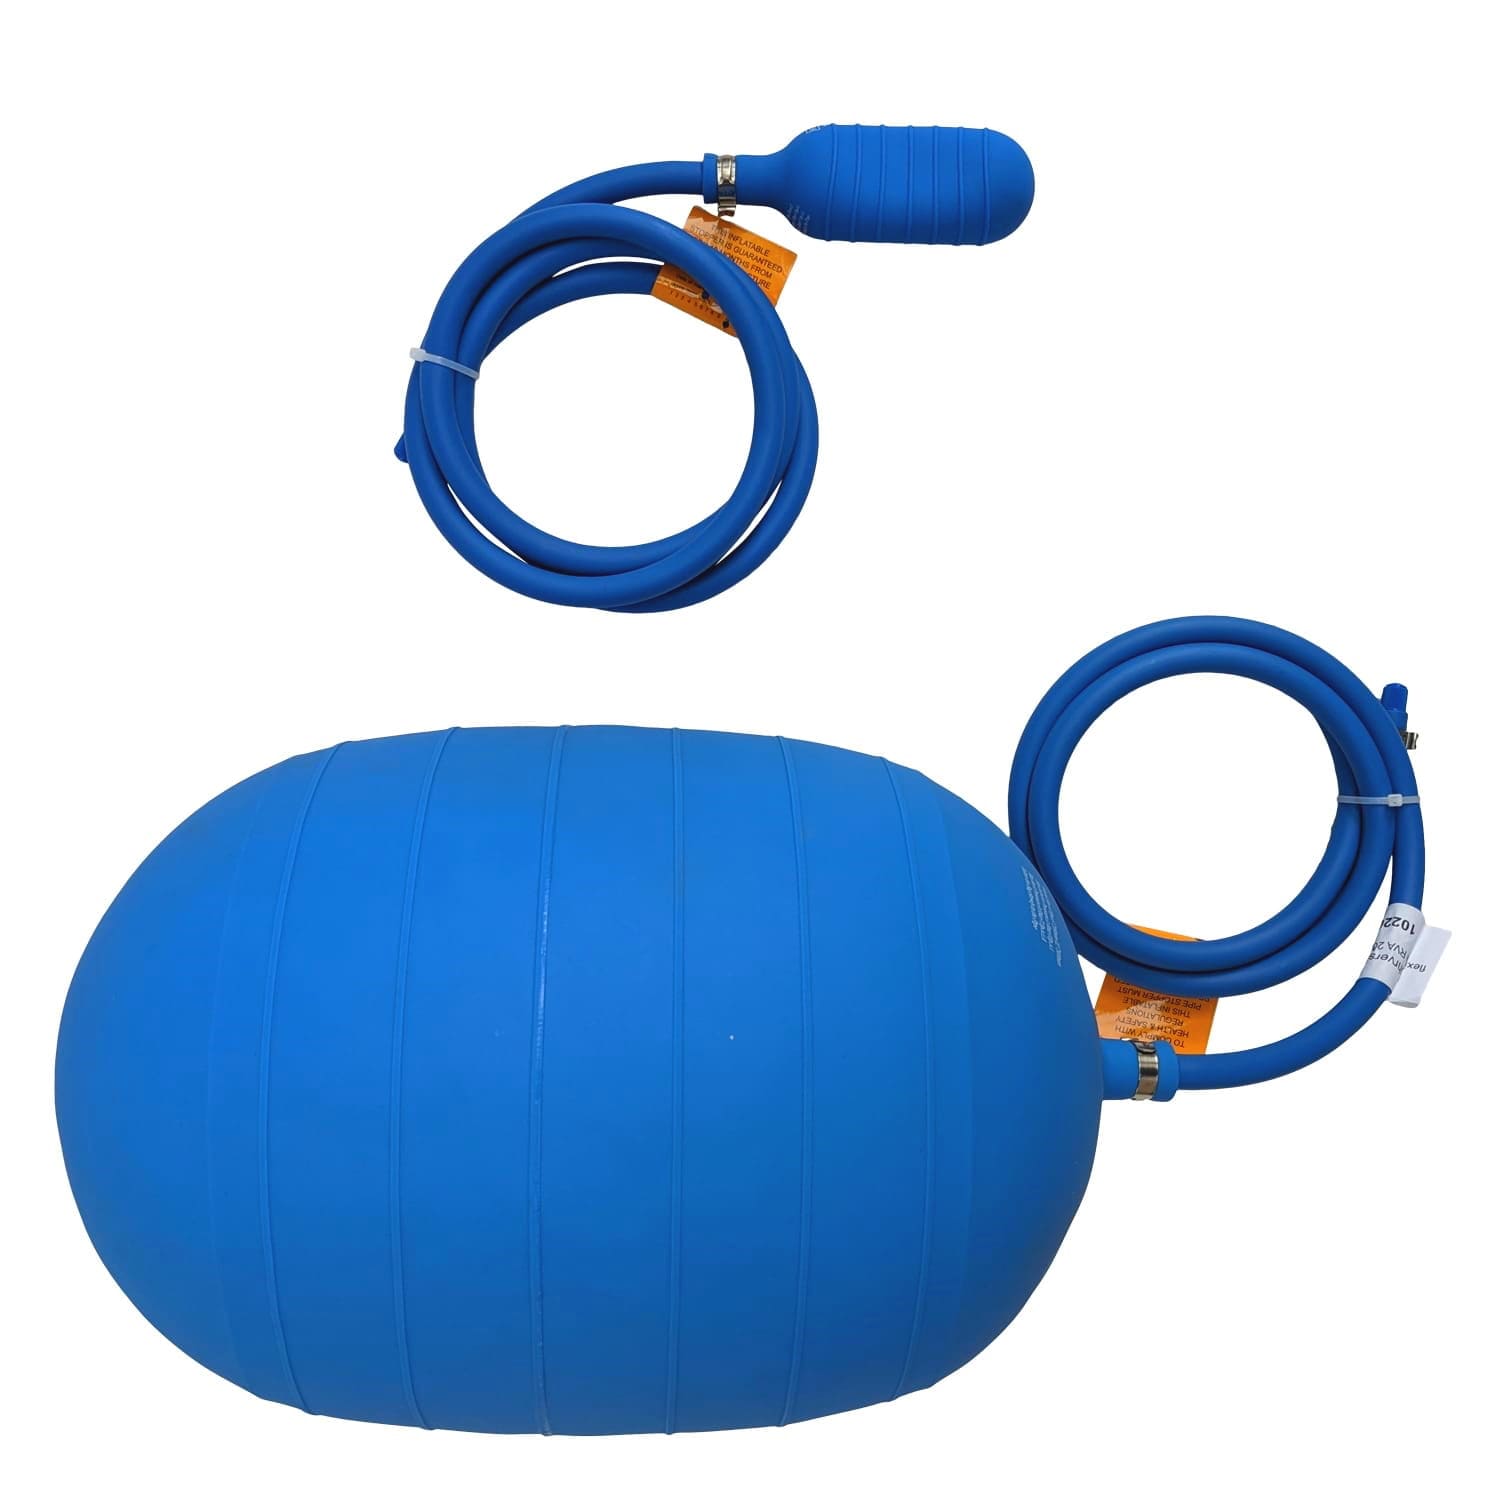 Inflatable PVC Pipe Plugs, fitted with 1.5m Inflation Hose & Schrader Valve